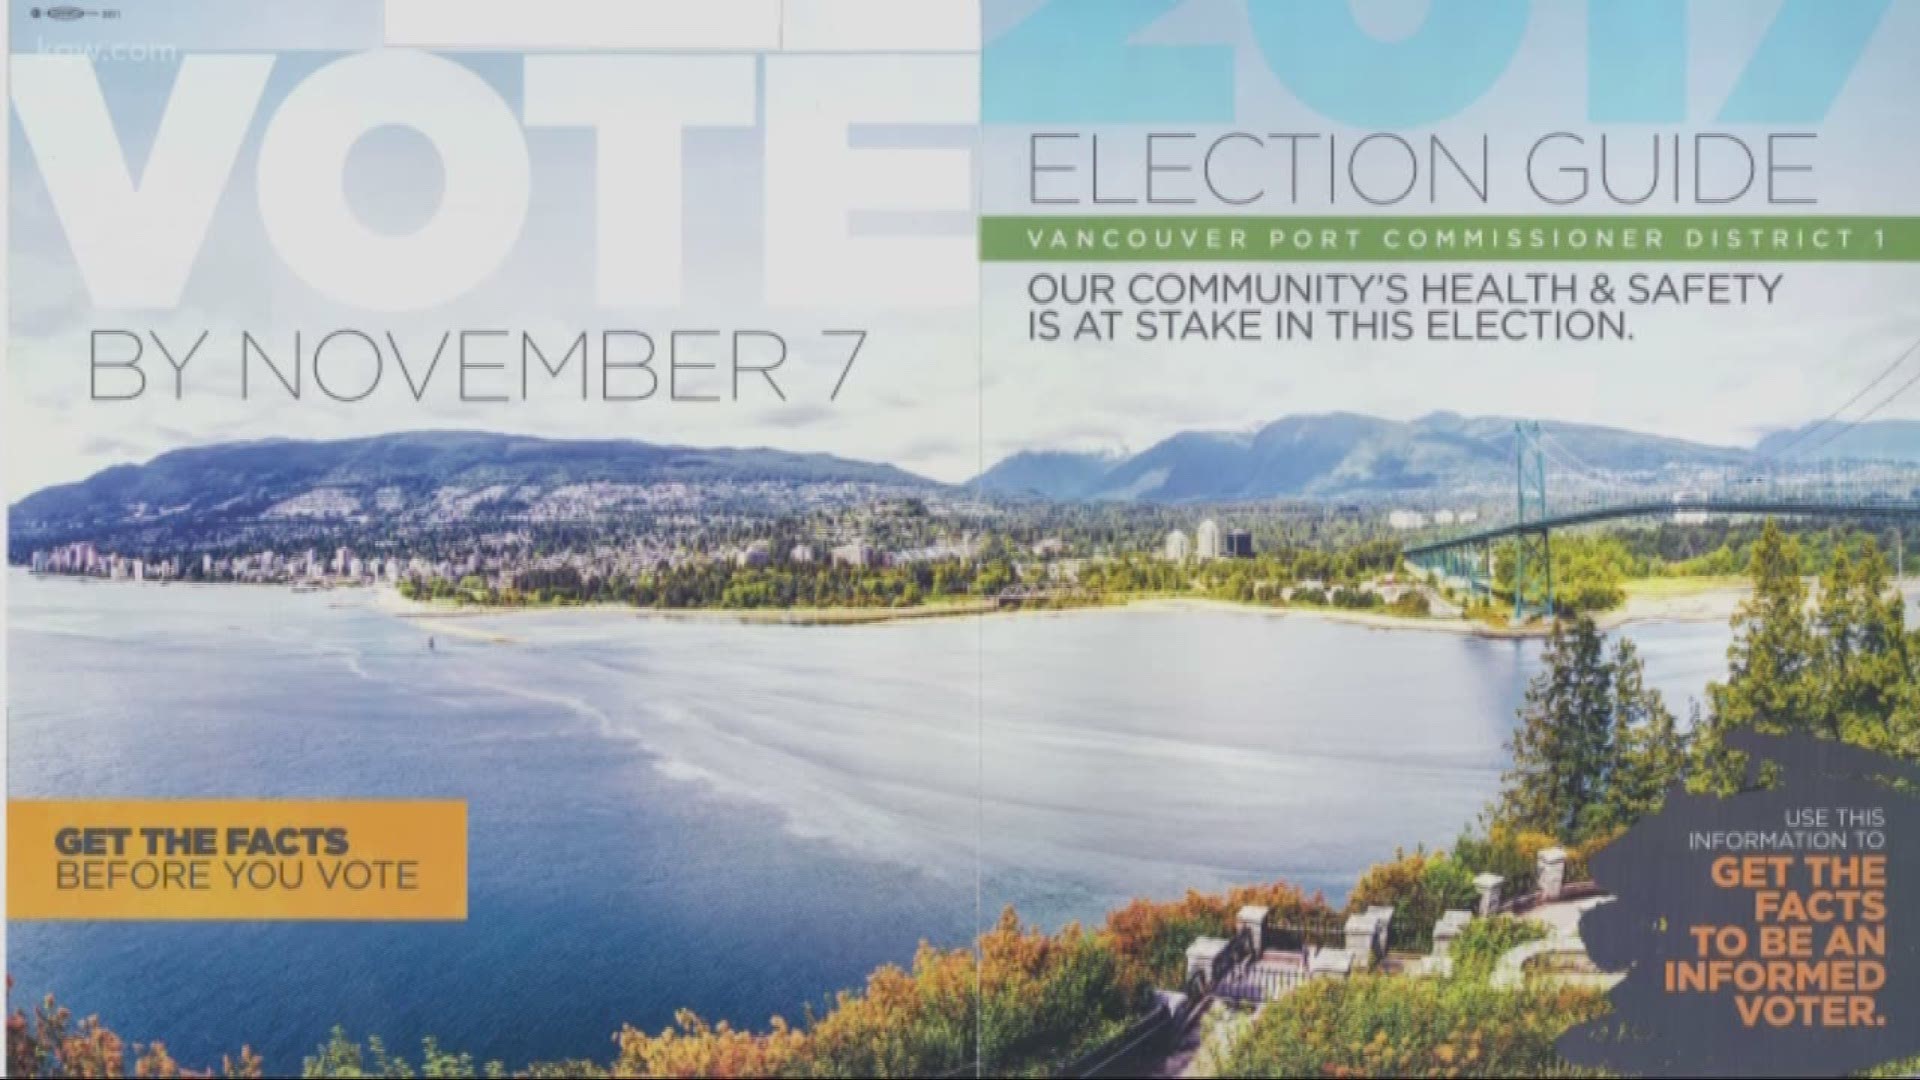 The campaign mailer showed Vancouver, BC 